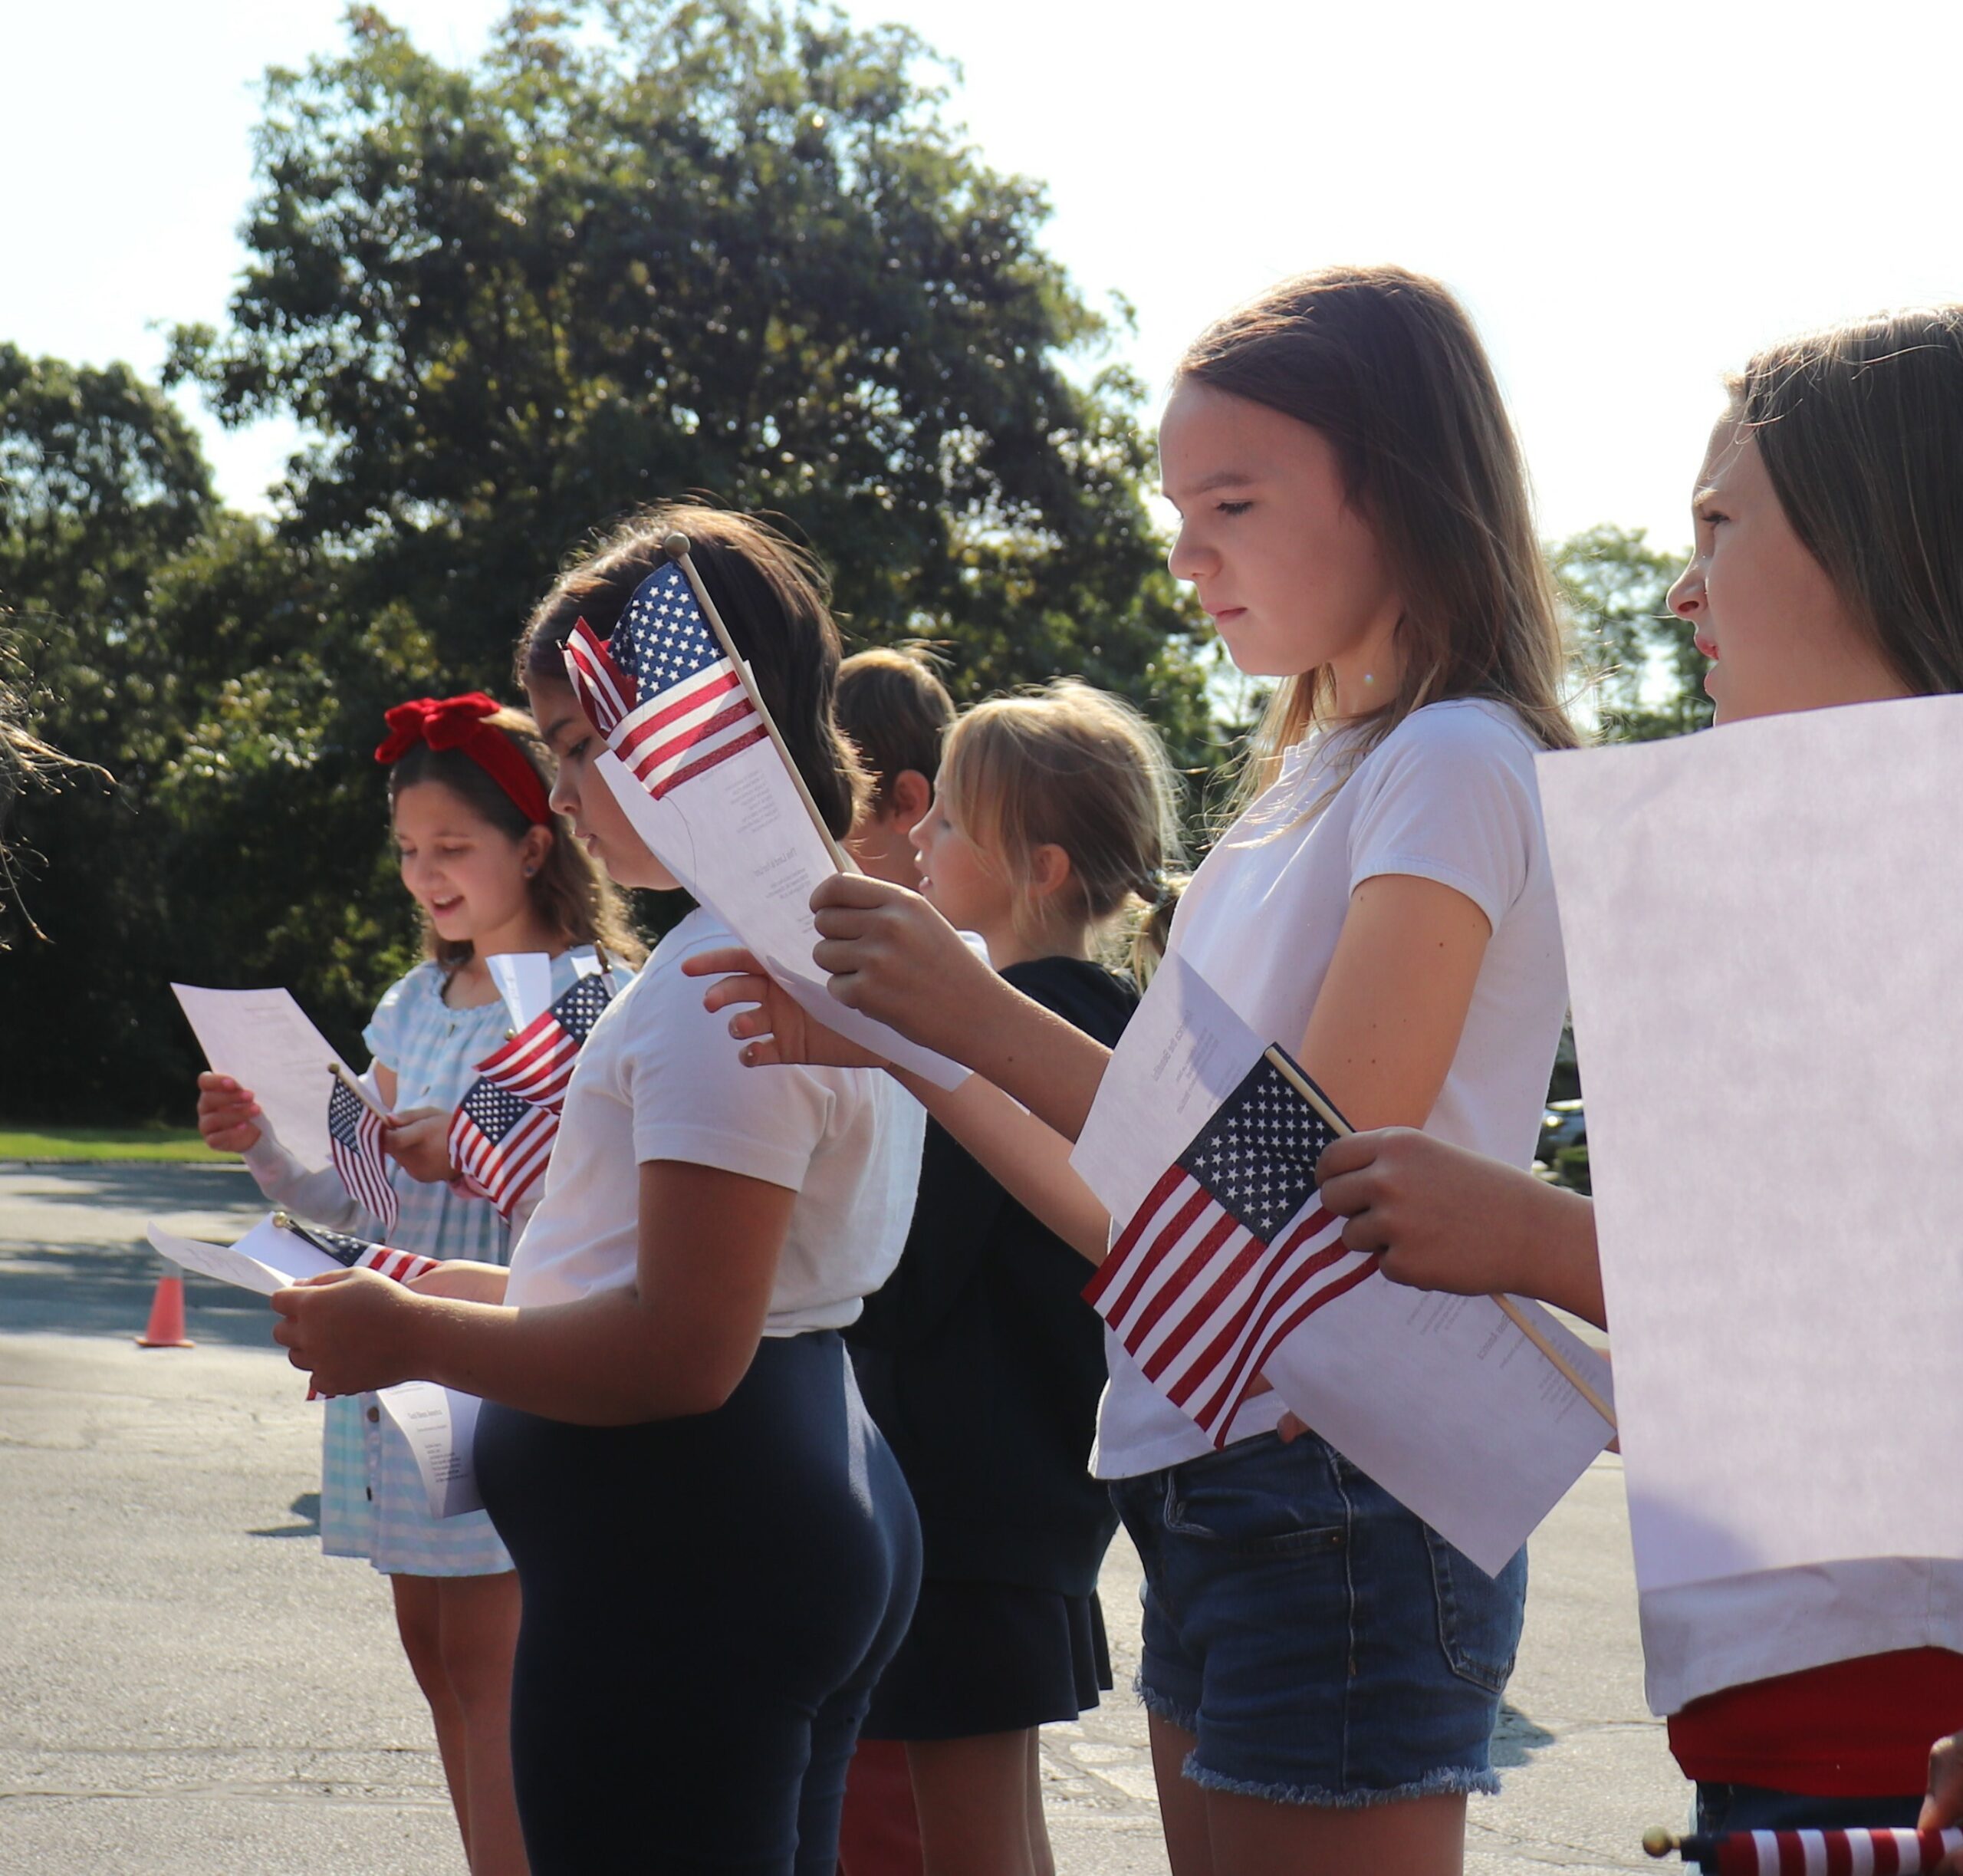 On Friday, September 9, the students, staff, and families of Raynor Country Day School hosted its annual Patriot Day Ceremony to honor the events of September 11. COURTESY RAYNOR COUNTRY DAY SCHOOL